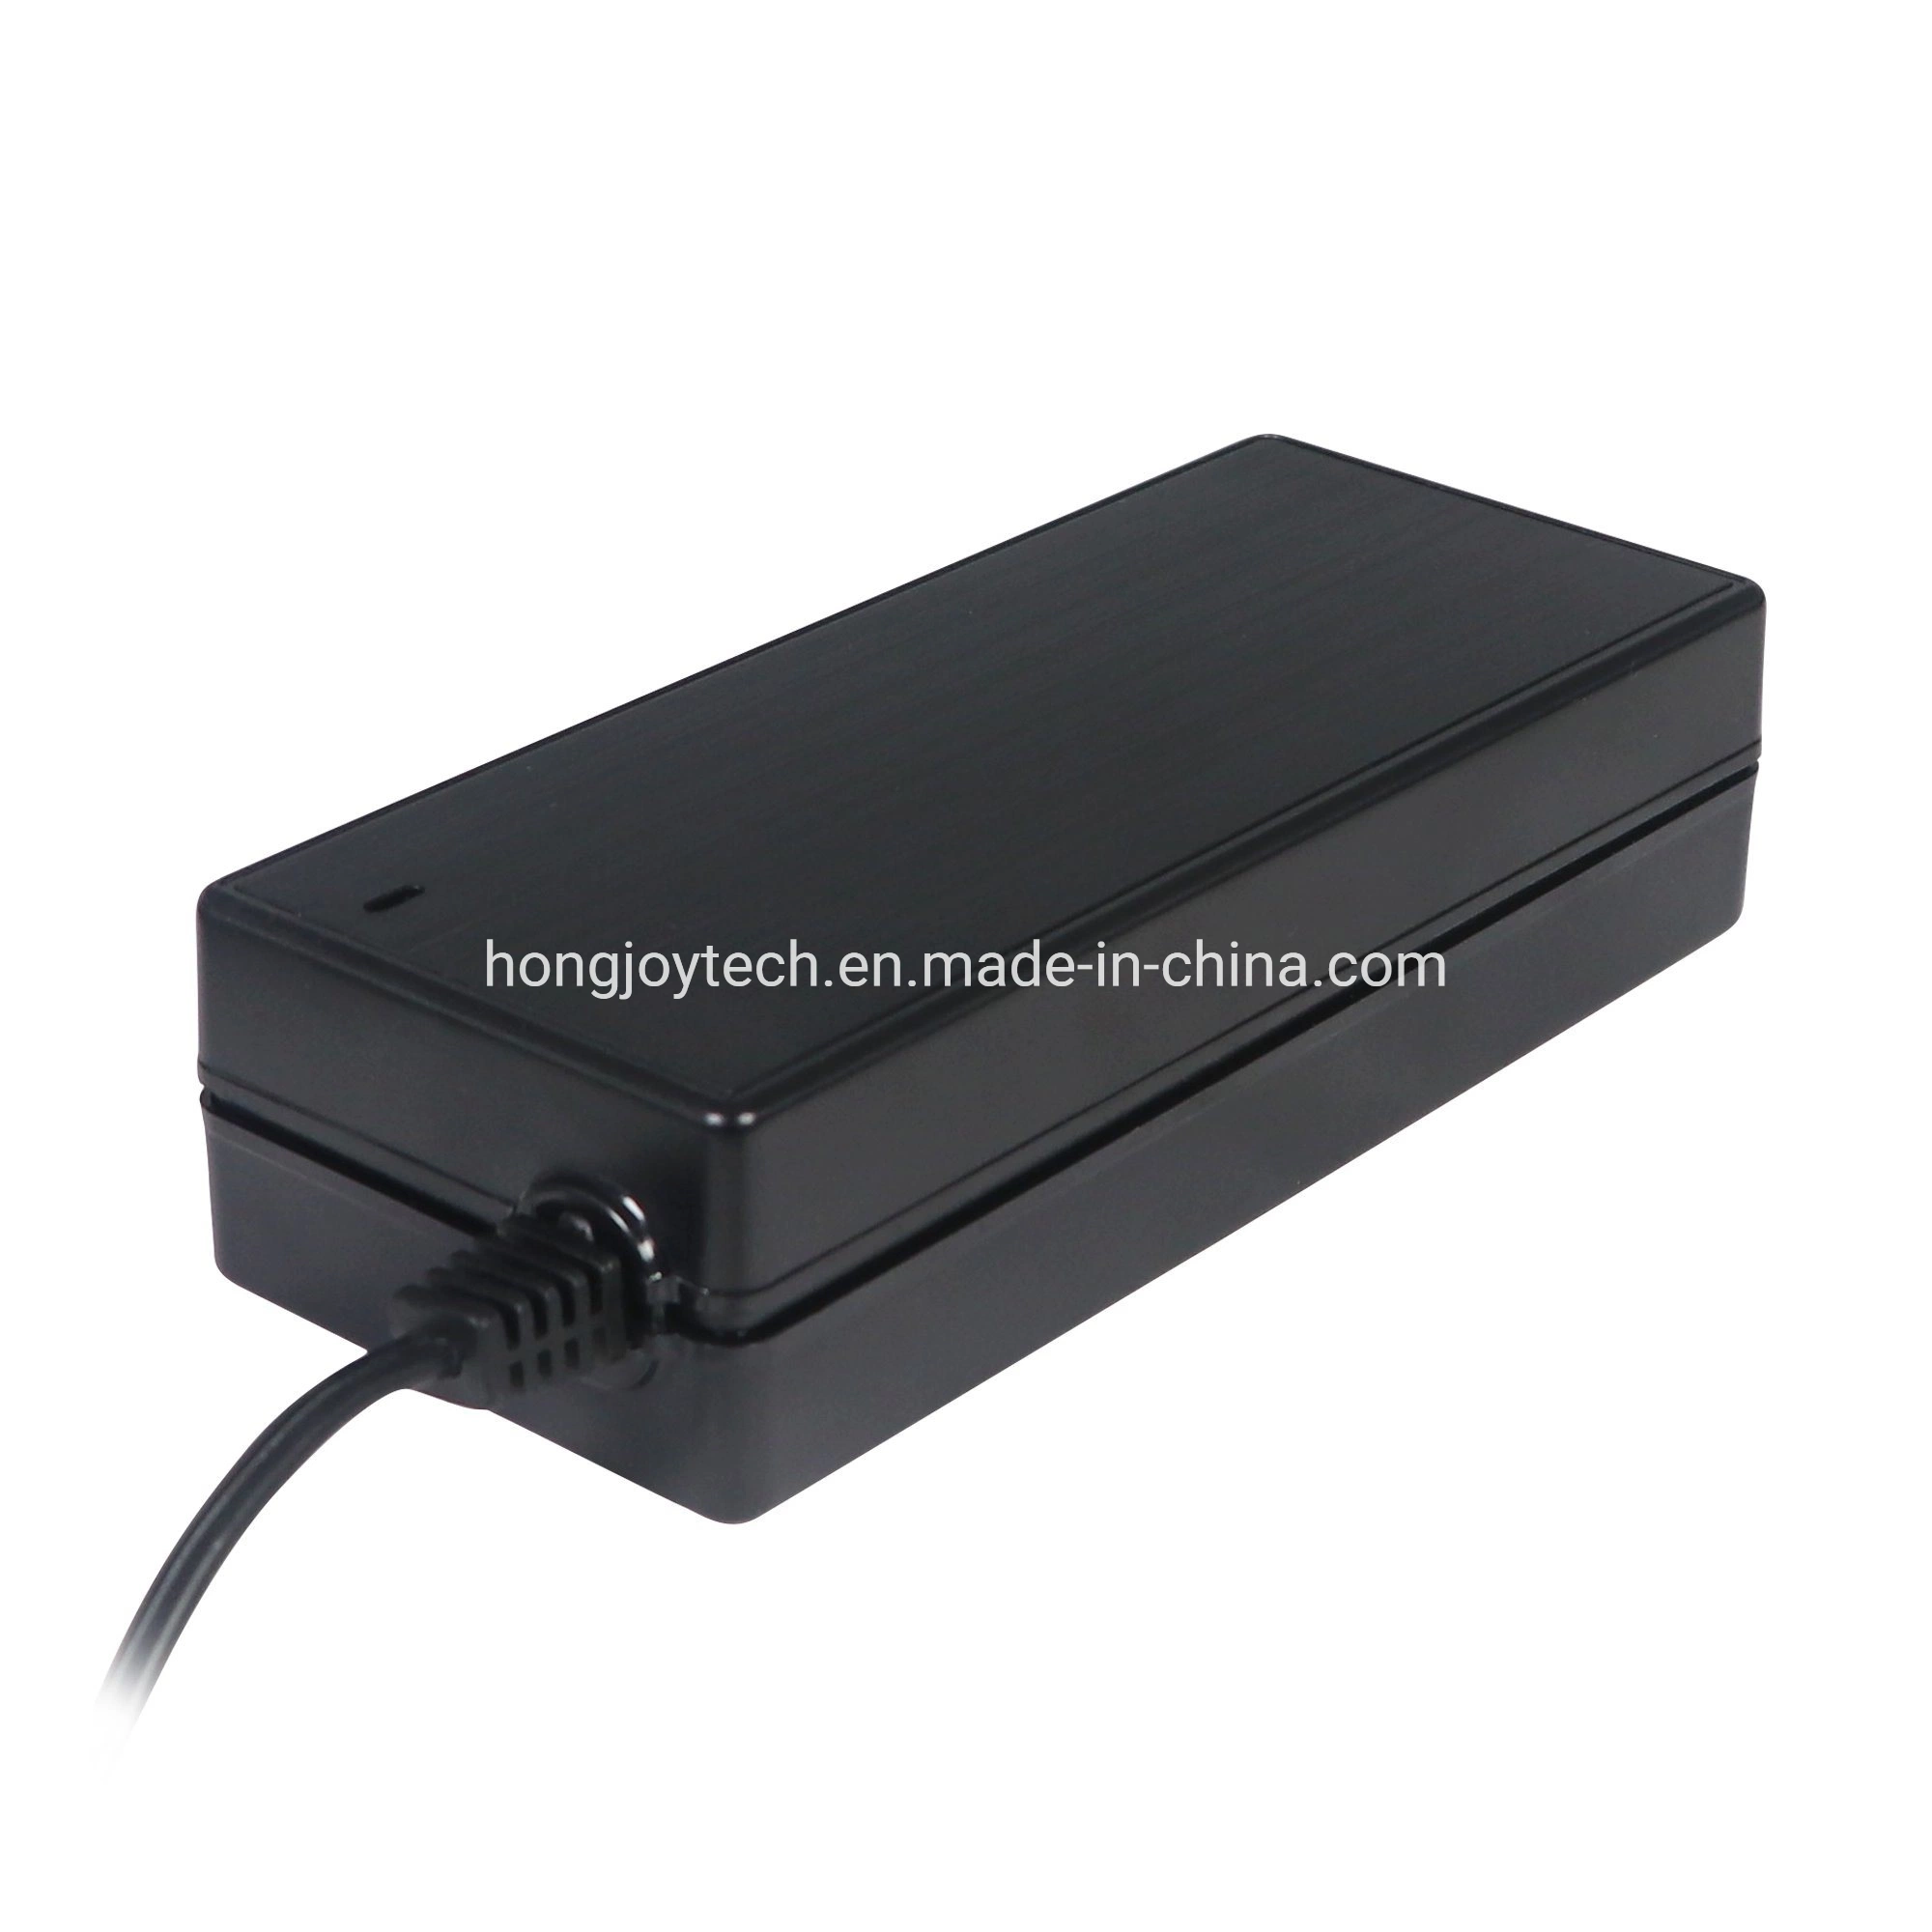 AC 100V~240V Switching Power Supply DC Adapter 33.6V 37.8V 42V 46.2V 50.4V 1A 1.5A 2A 1.5A 2.5A 3A Rechargeable Lithium Li-ion Battery Charger for Ebike Drone